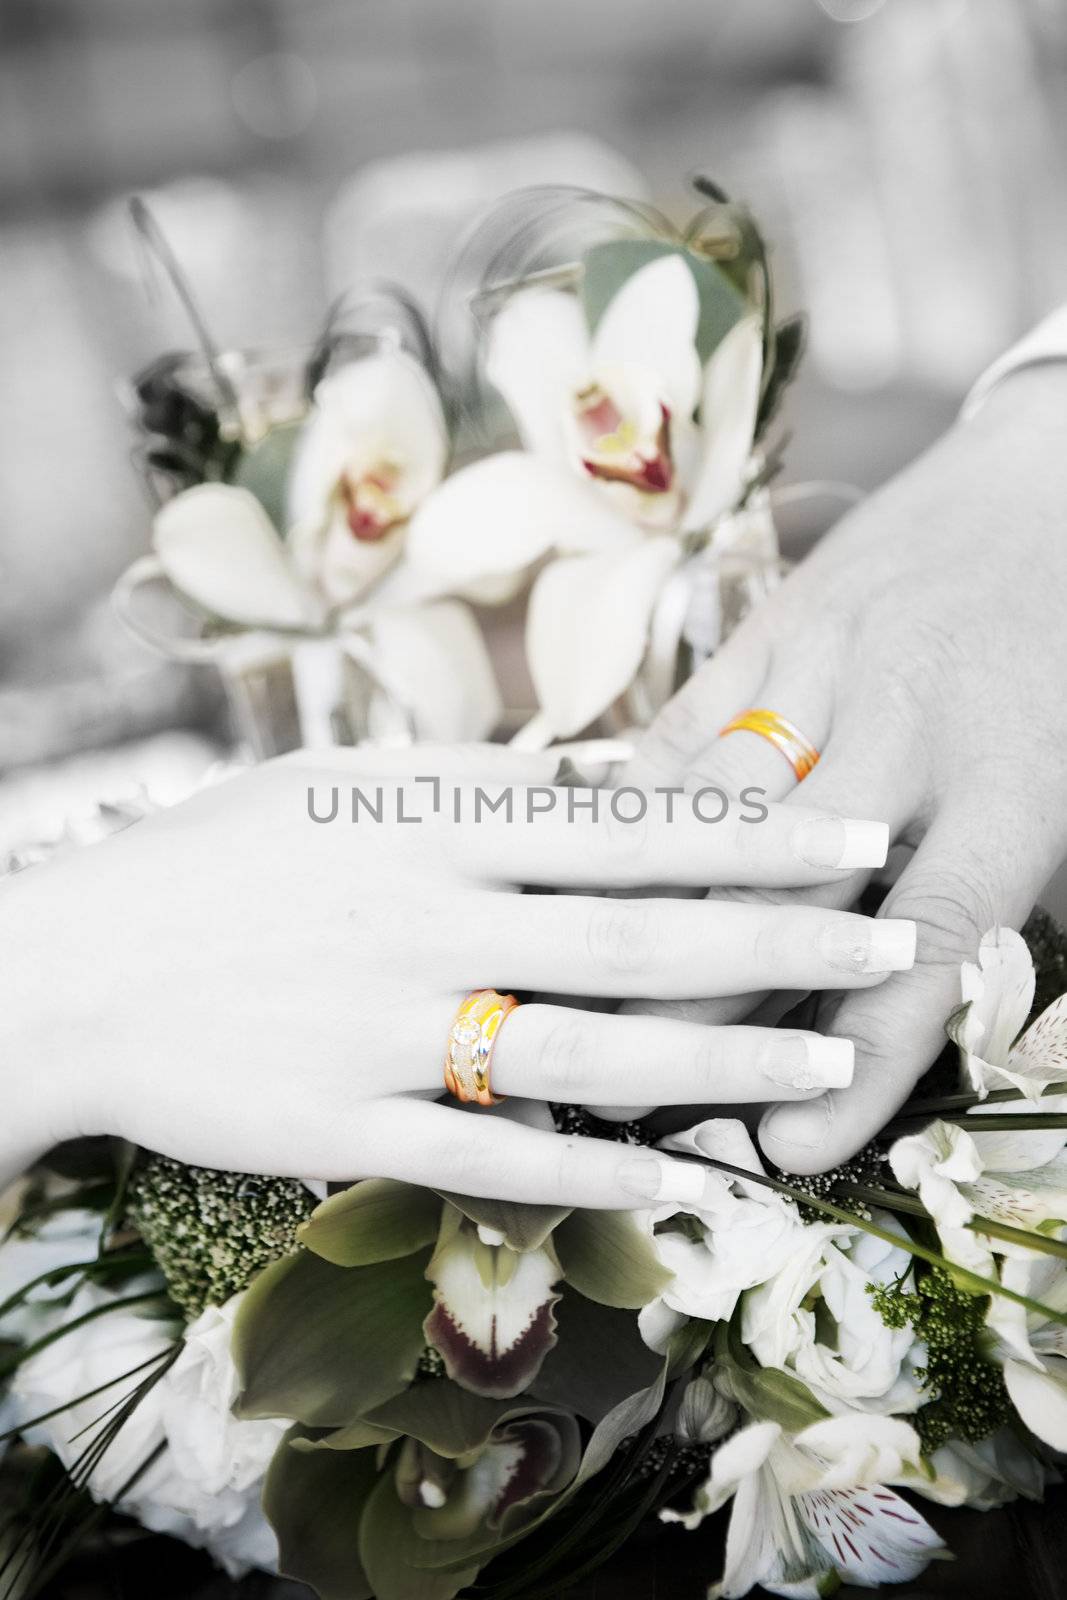 hand of groom and hand of bride with wedding rings on the flower bouquet in black and white